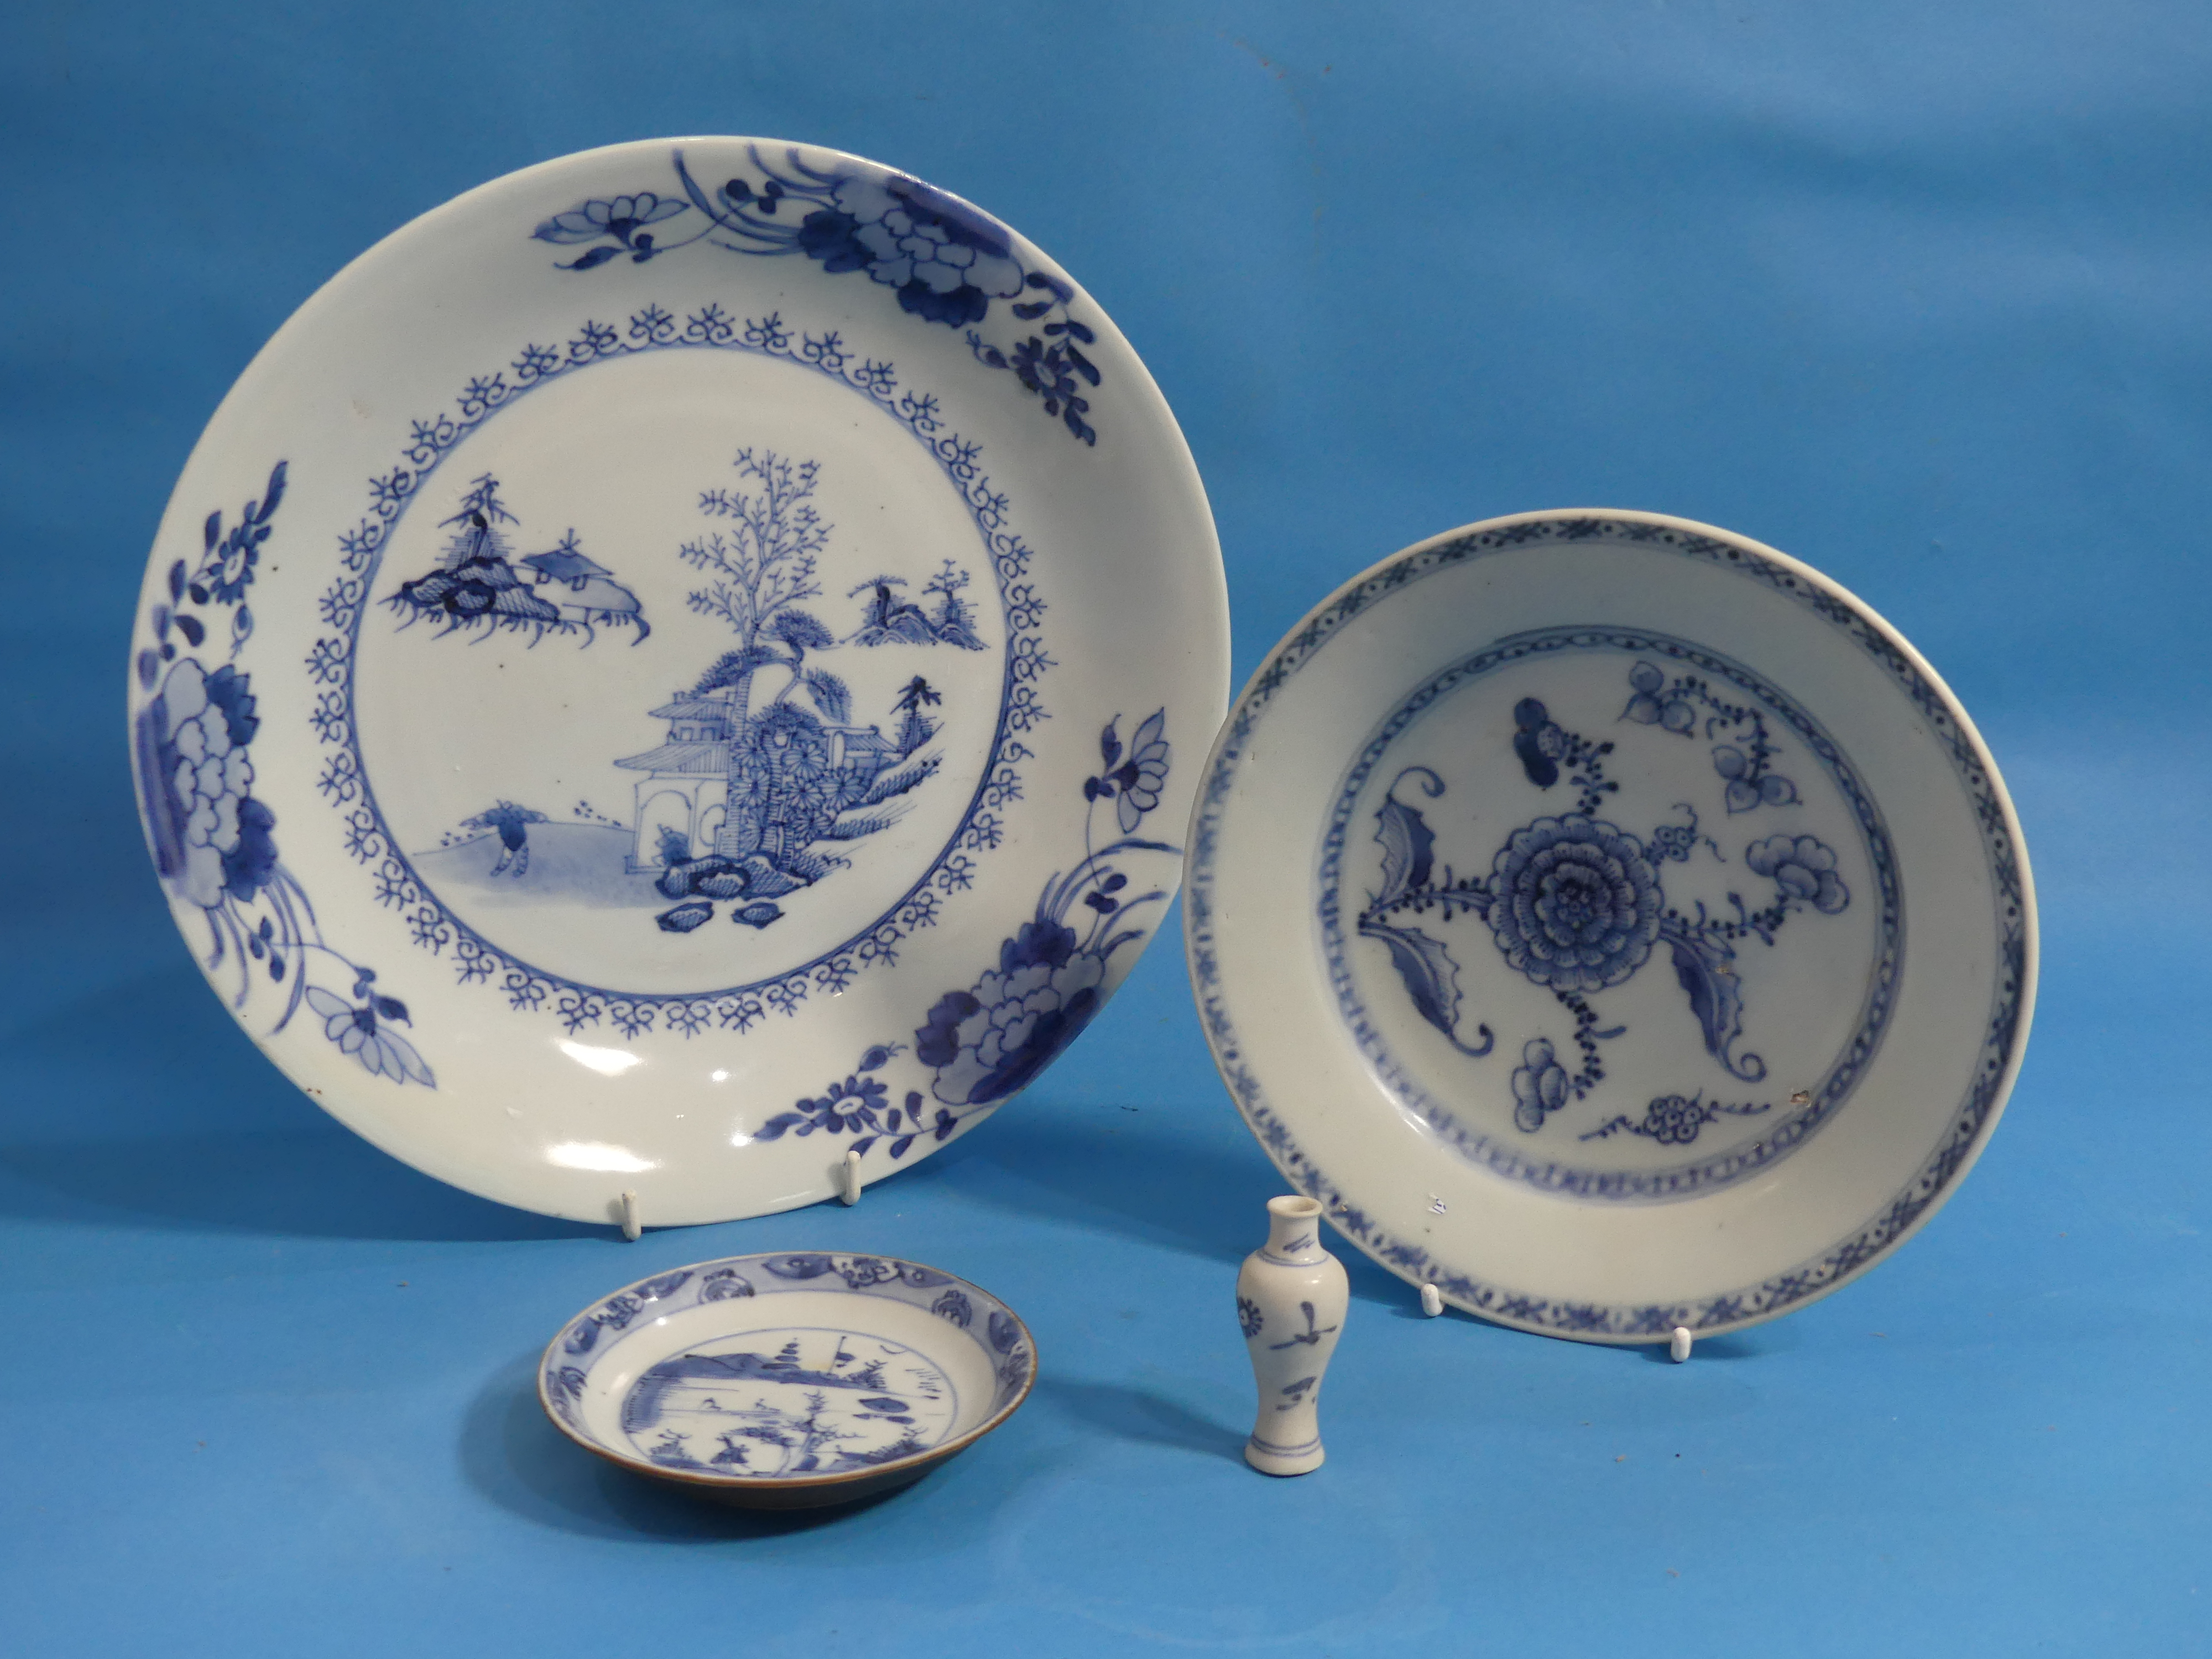 A Chinese export 'Nanking Cargo' blue and white porcelain Dish, decorated with trees and pavillions, - Image 2 of 6